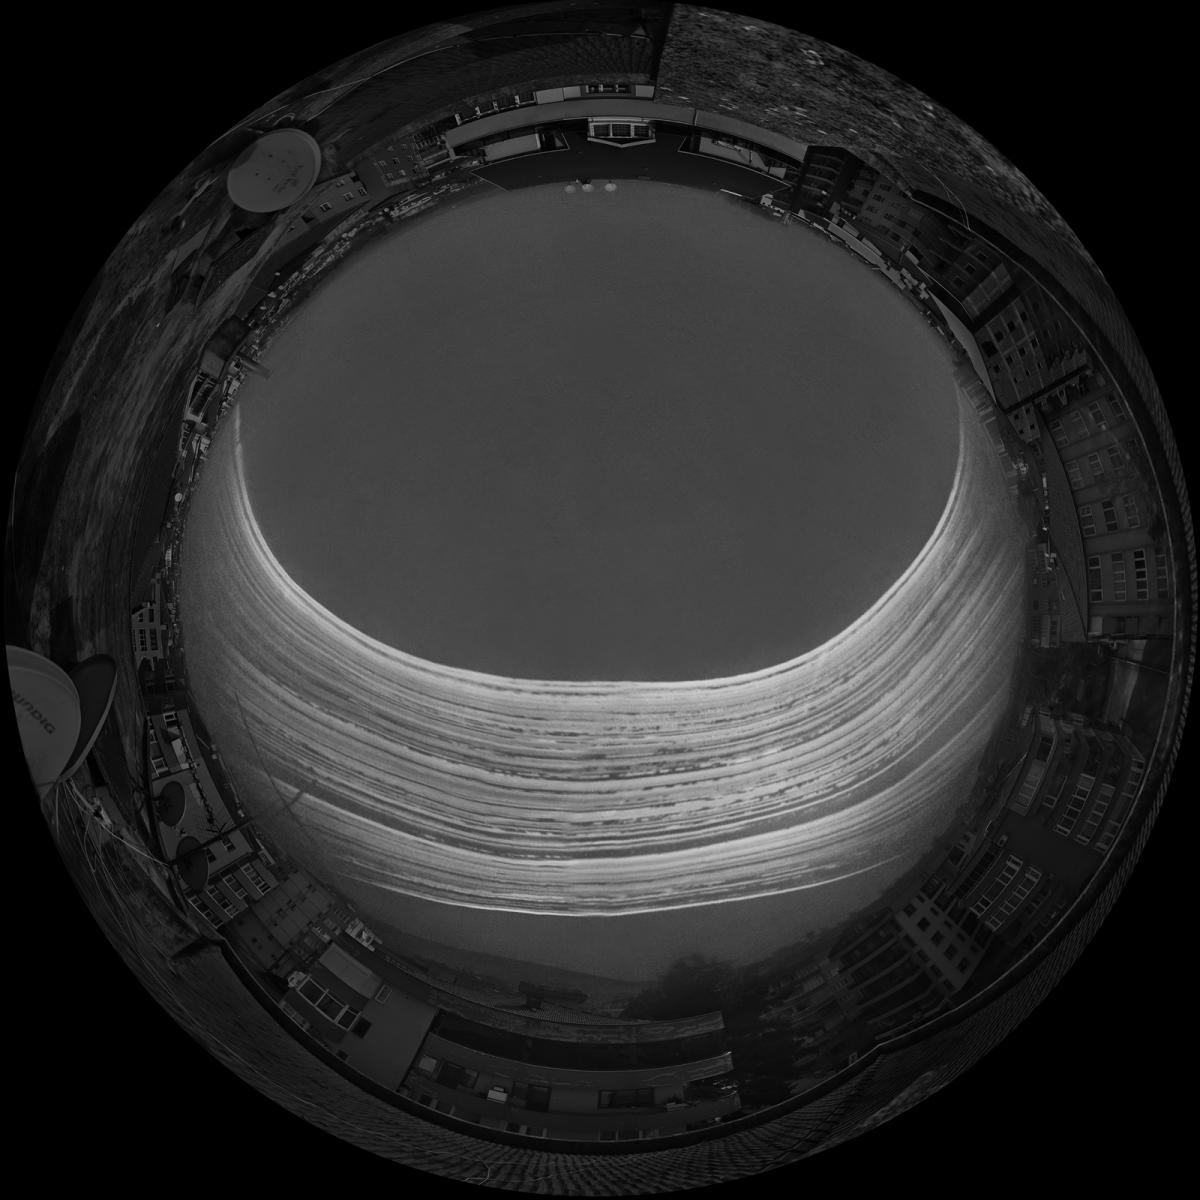 An artistic black and white fish eye view photograph, showing a cityscape as a 'circle' in the frame. In the middle of the circle, multiple bright white lines of light show where the Sun has passed on different days over the course of the photo's exposure